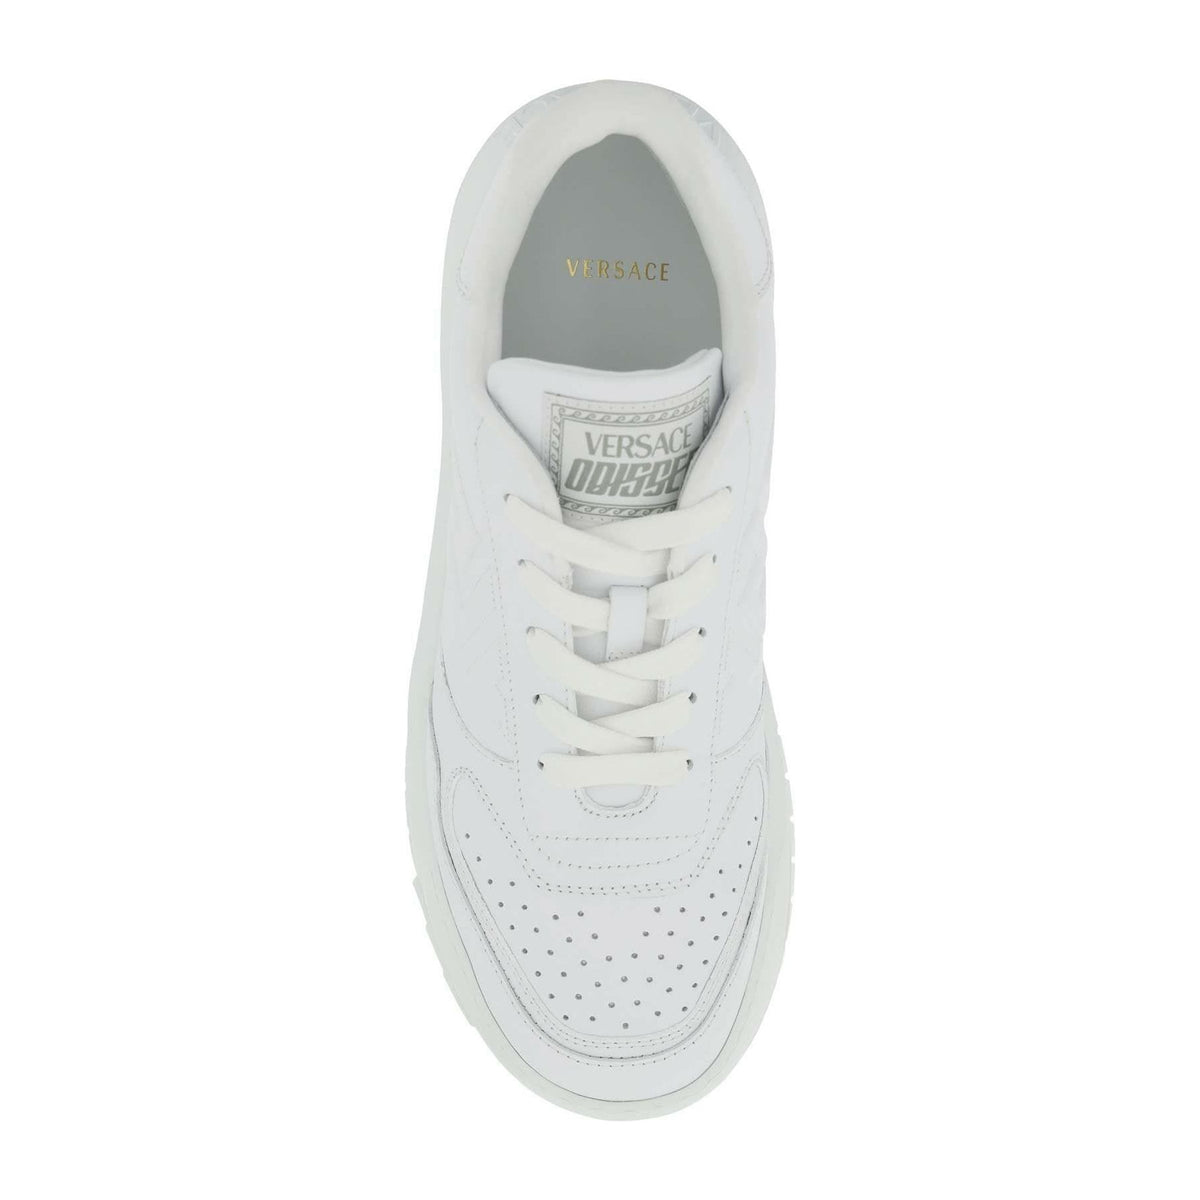 Optical White Leather Odissea Sneakers With Lettering Print On Heel VERSACE JOHN JULIA.